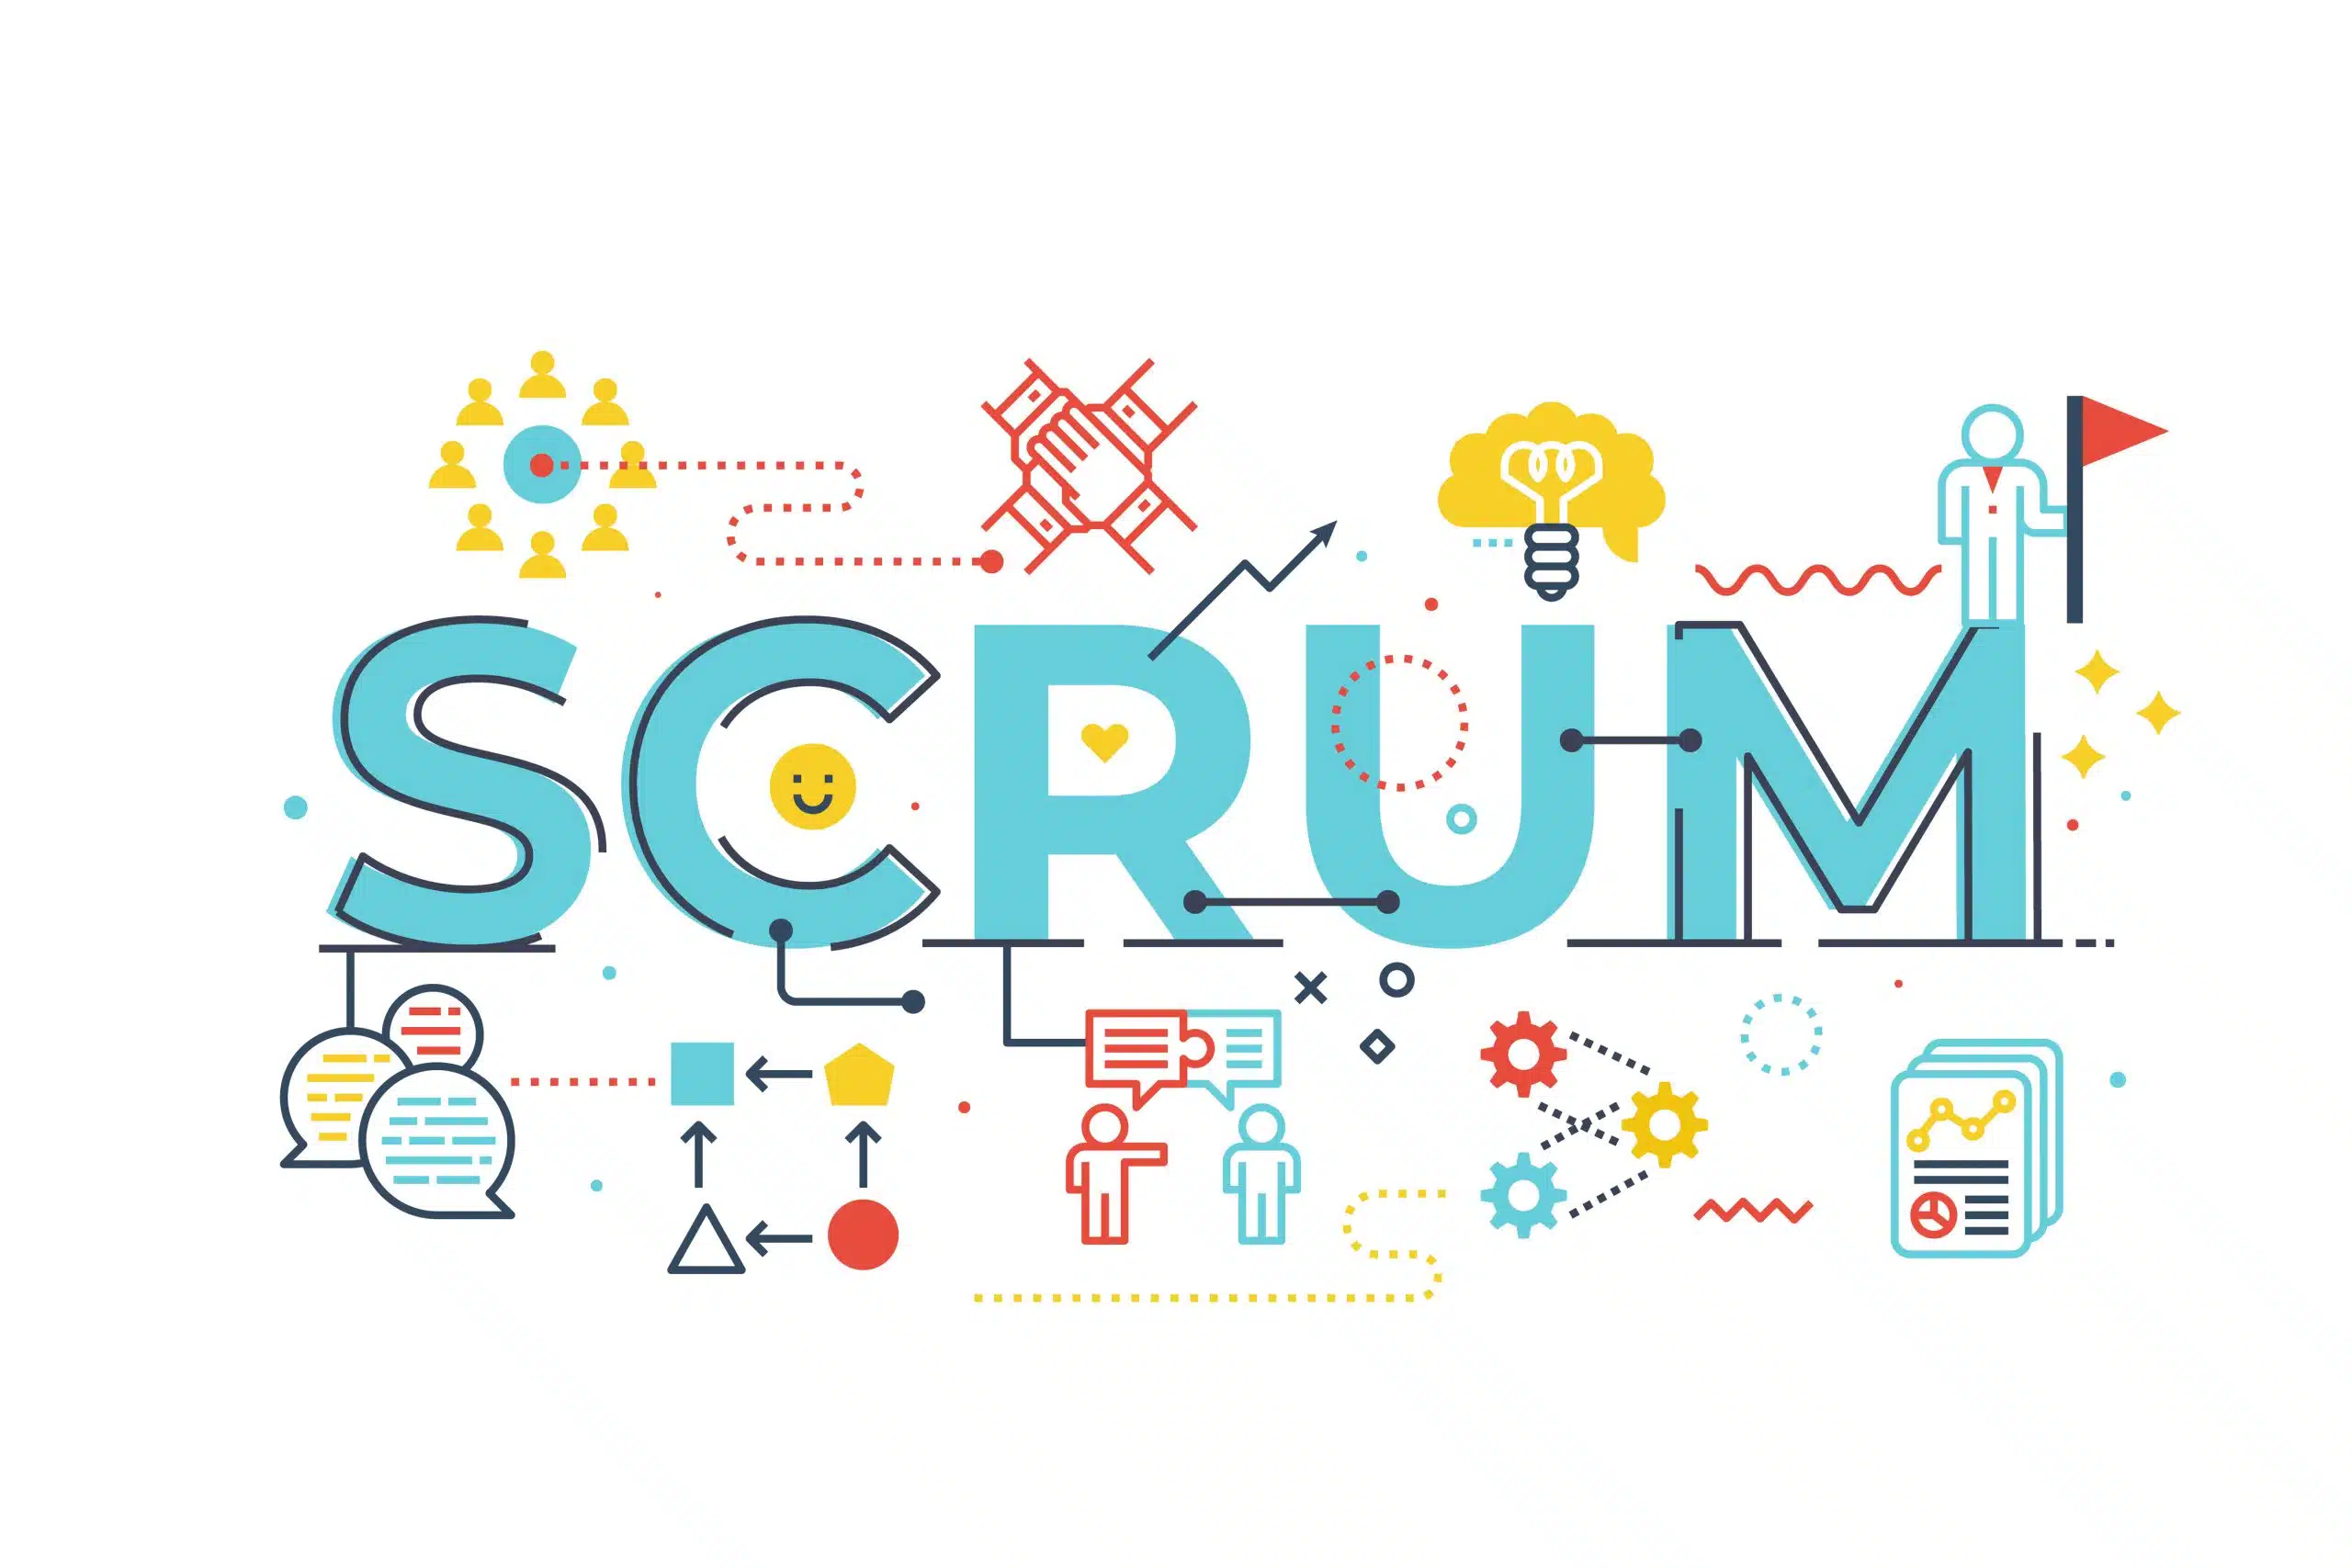 Scrum: Definition, Characteristics and How to Apply it